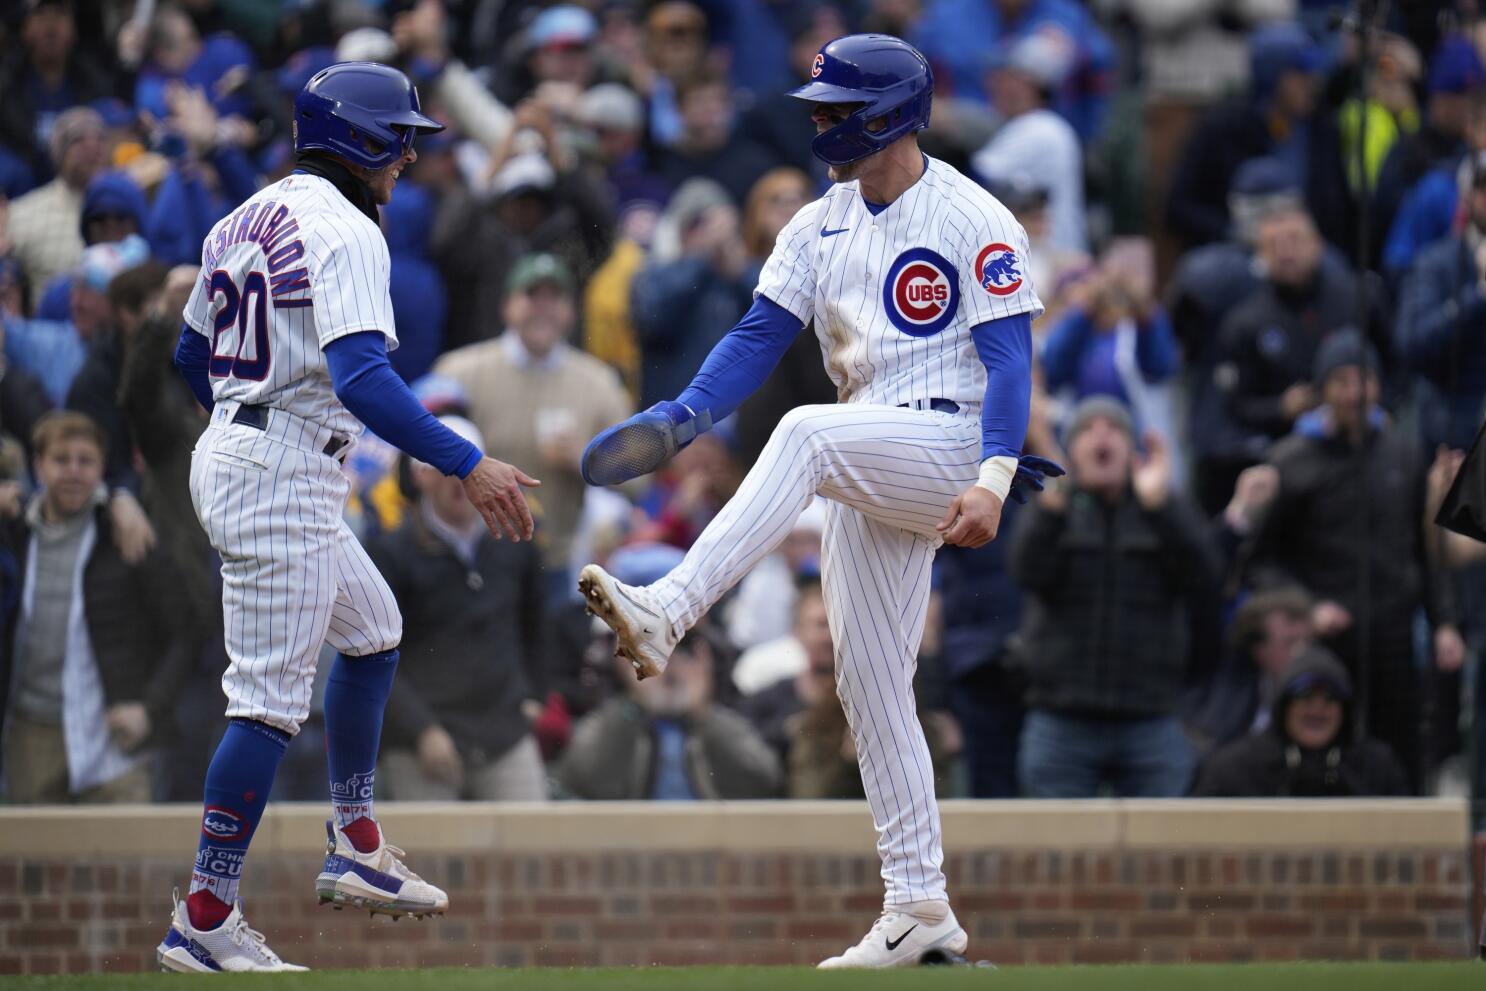 Cubs' Dansby Swanson, Nico Hoerner expect their partnership to